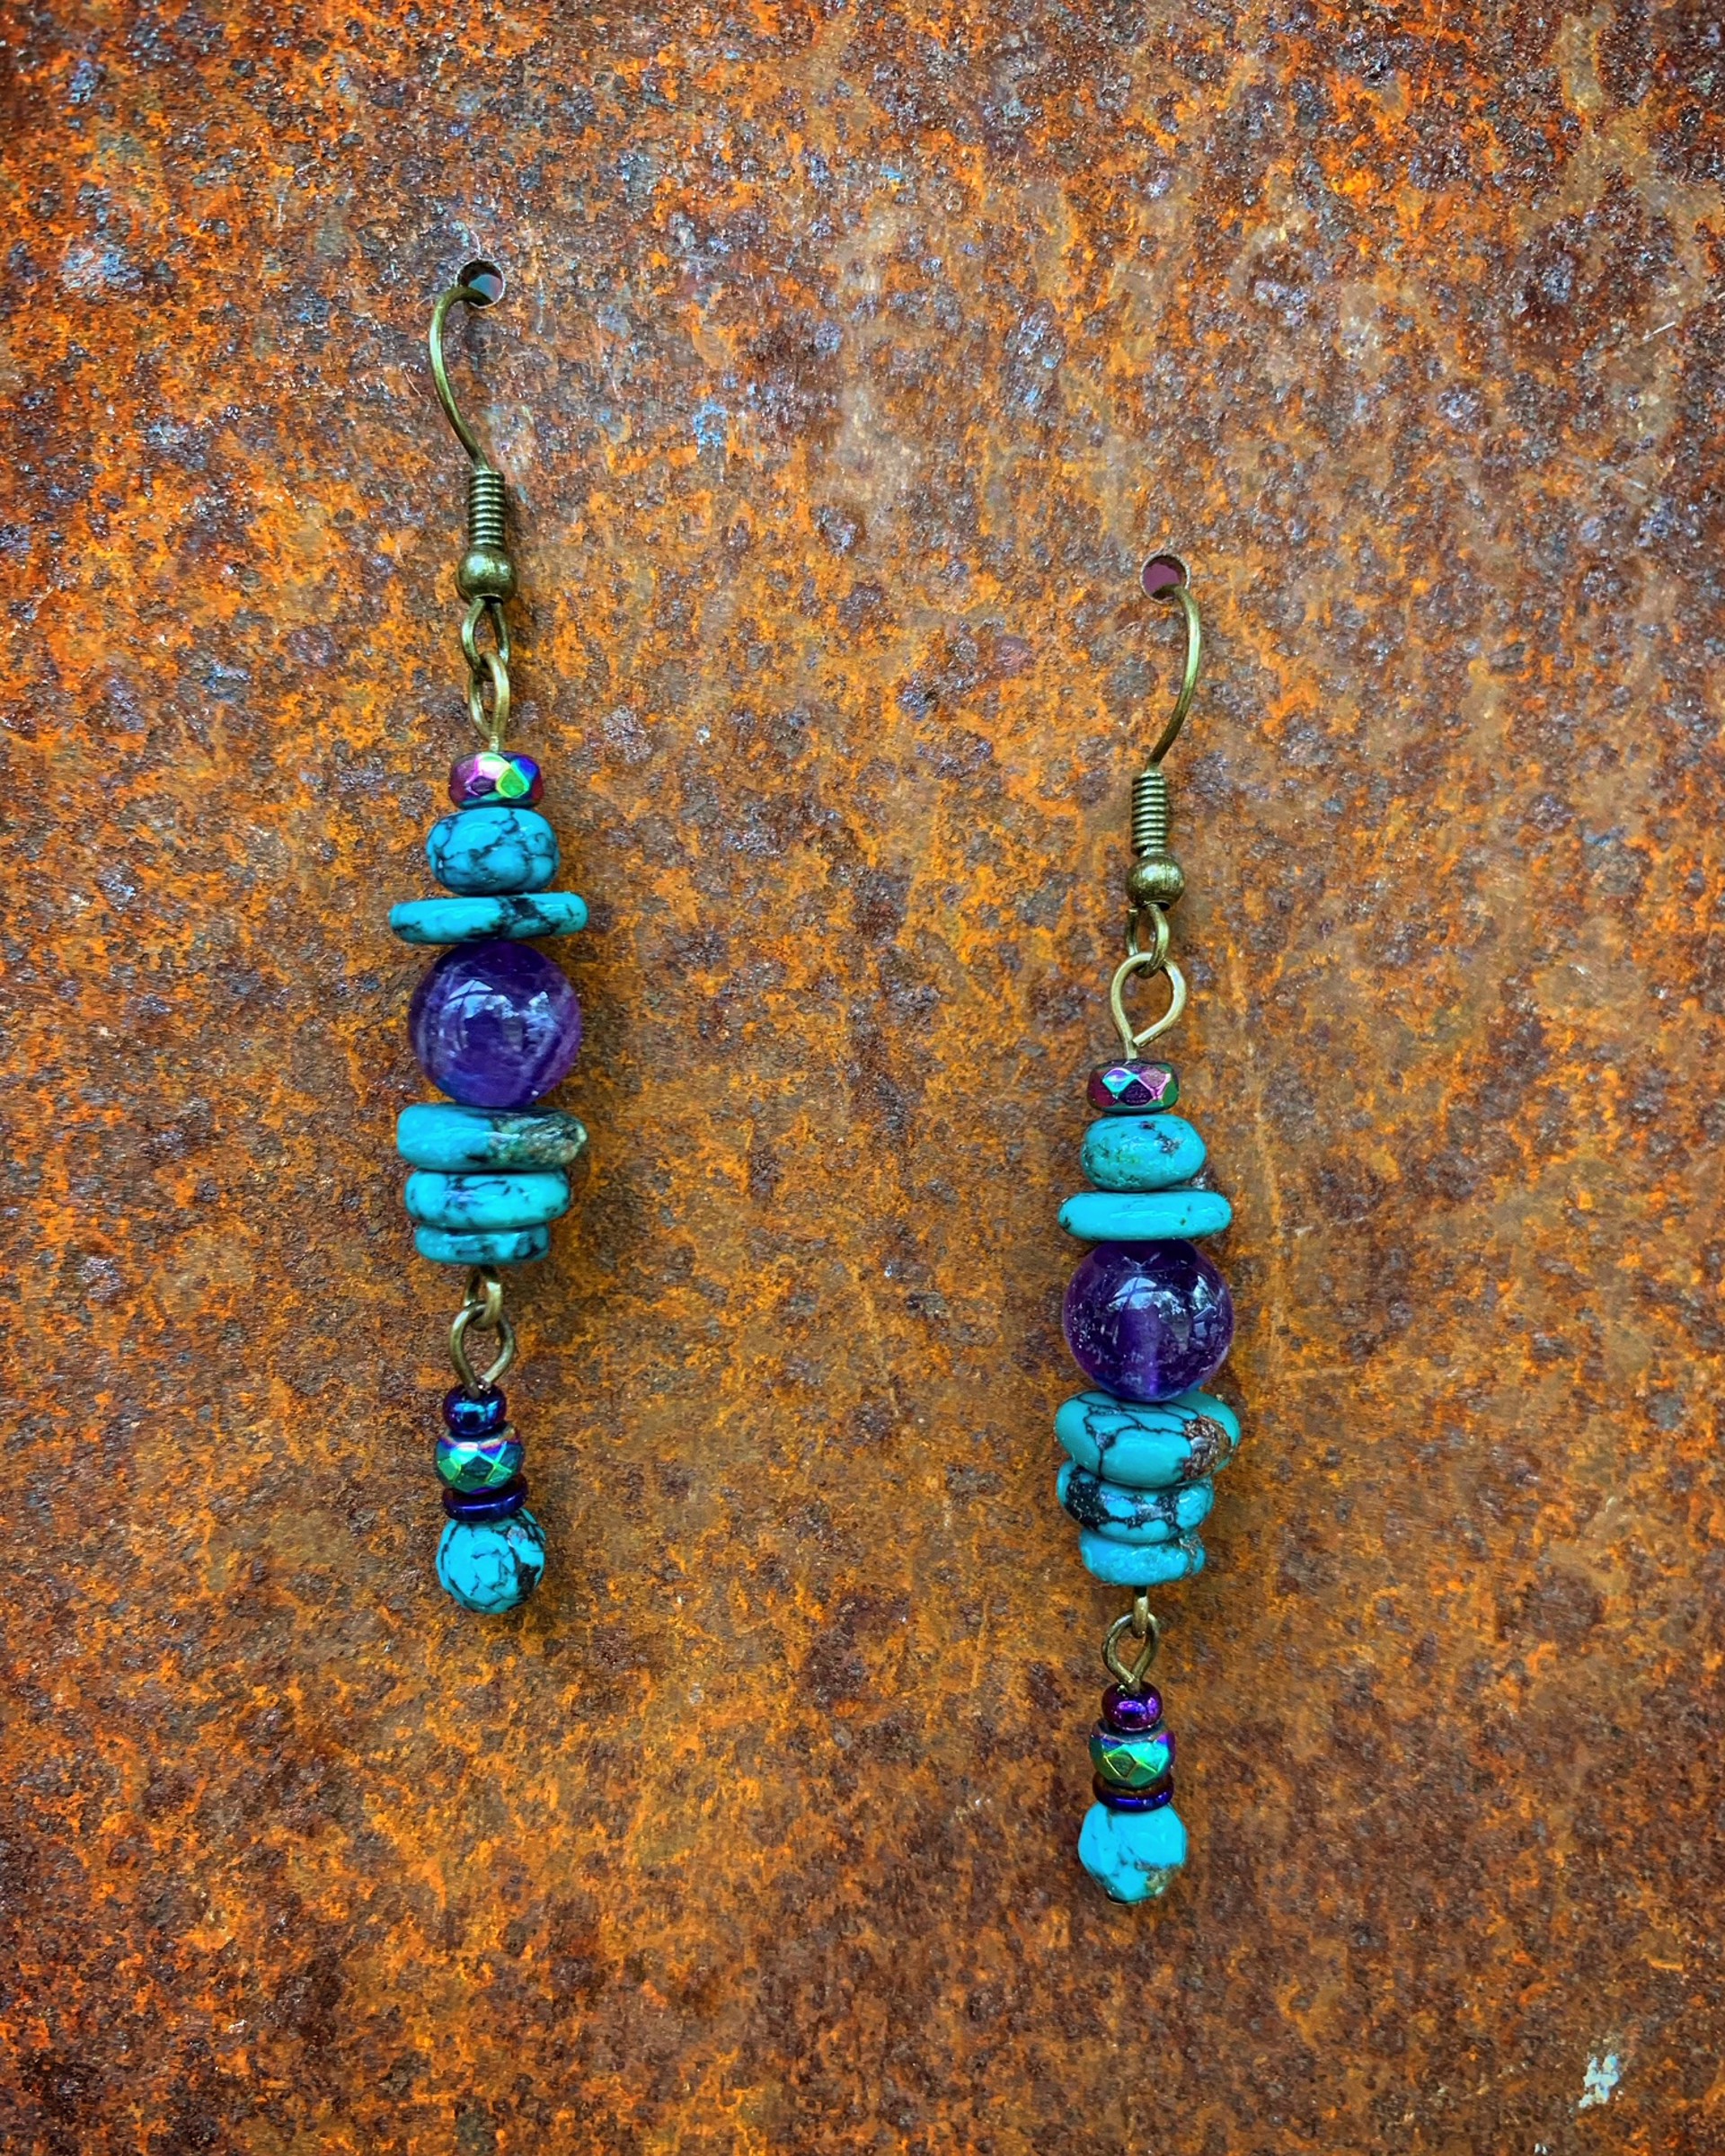 K848 Amethyst and Turquoise Earrings by Kelly Ormsby